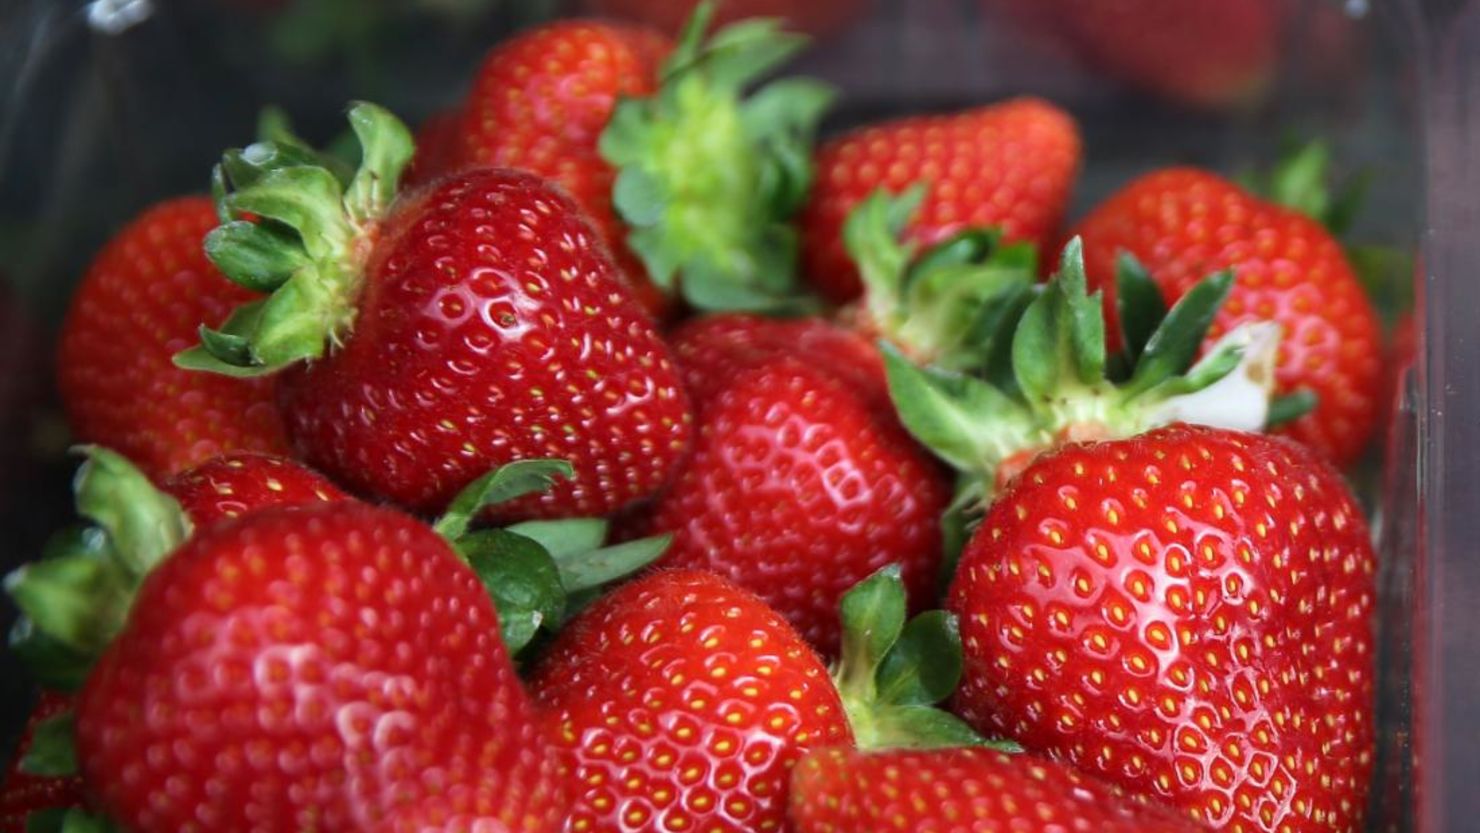 There have been reports of sewing needles and pins found in strawberries in two Australian states.